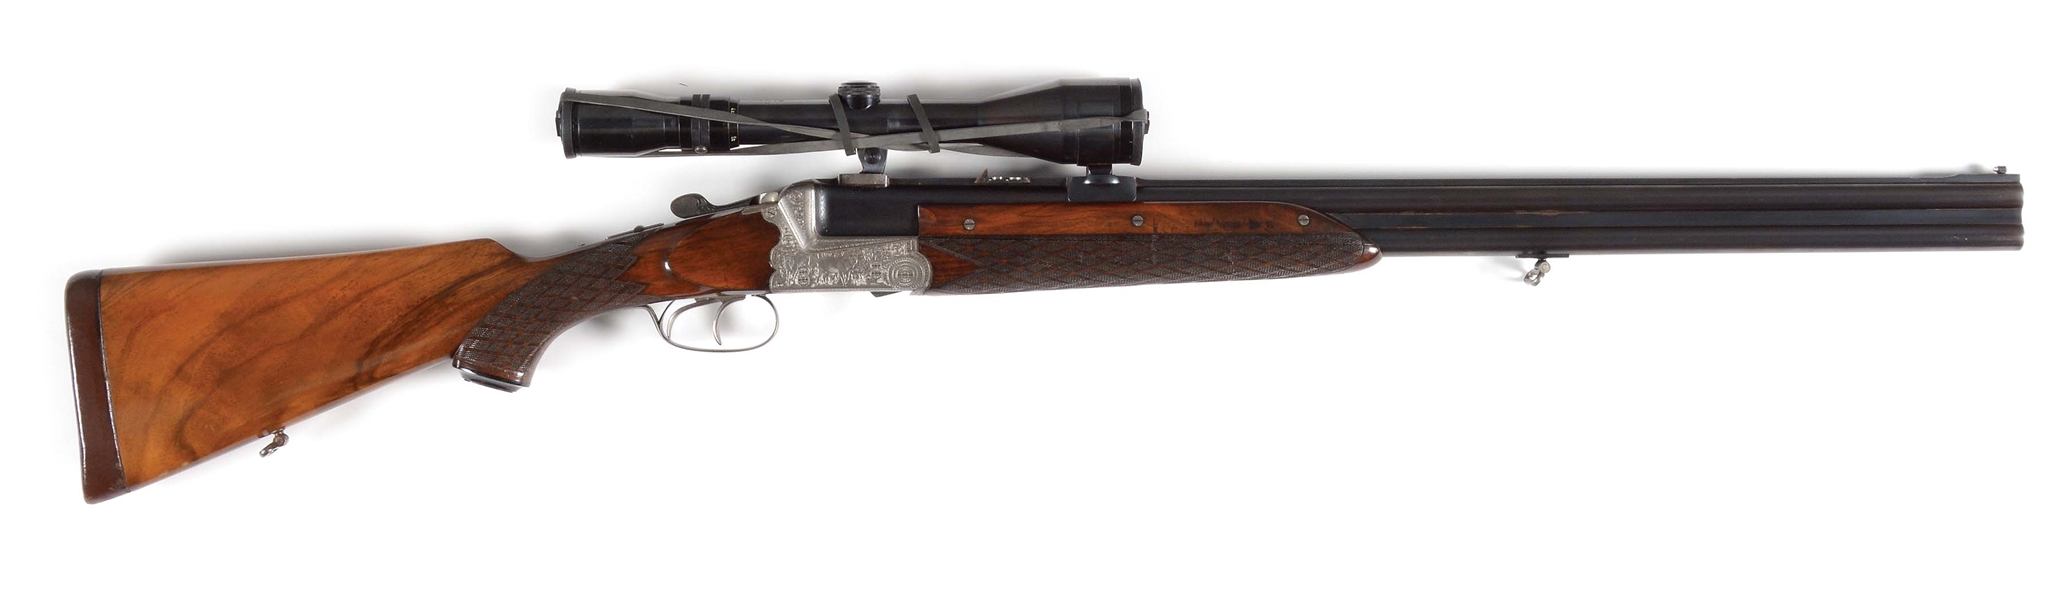 (C) FRANZ SODIA OVER UNDER DANGEROUS GAME (.470 NE) DOUBLE RIFLE WITH SCOPE. 